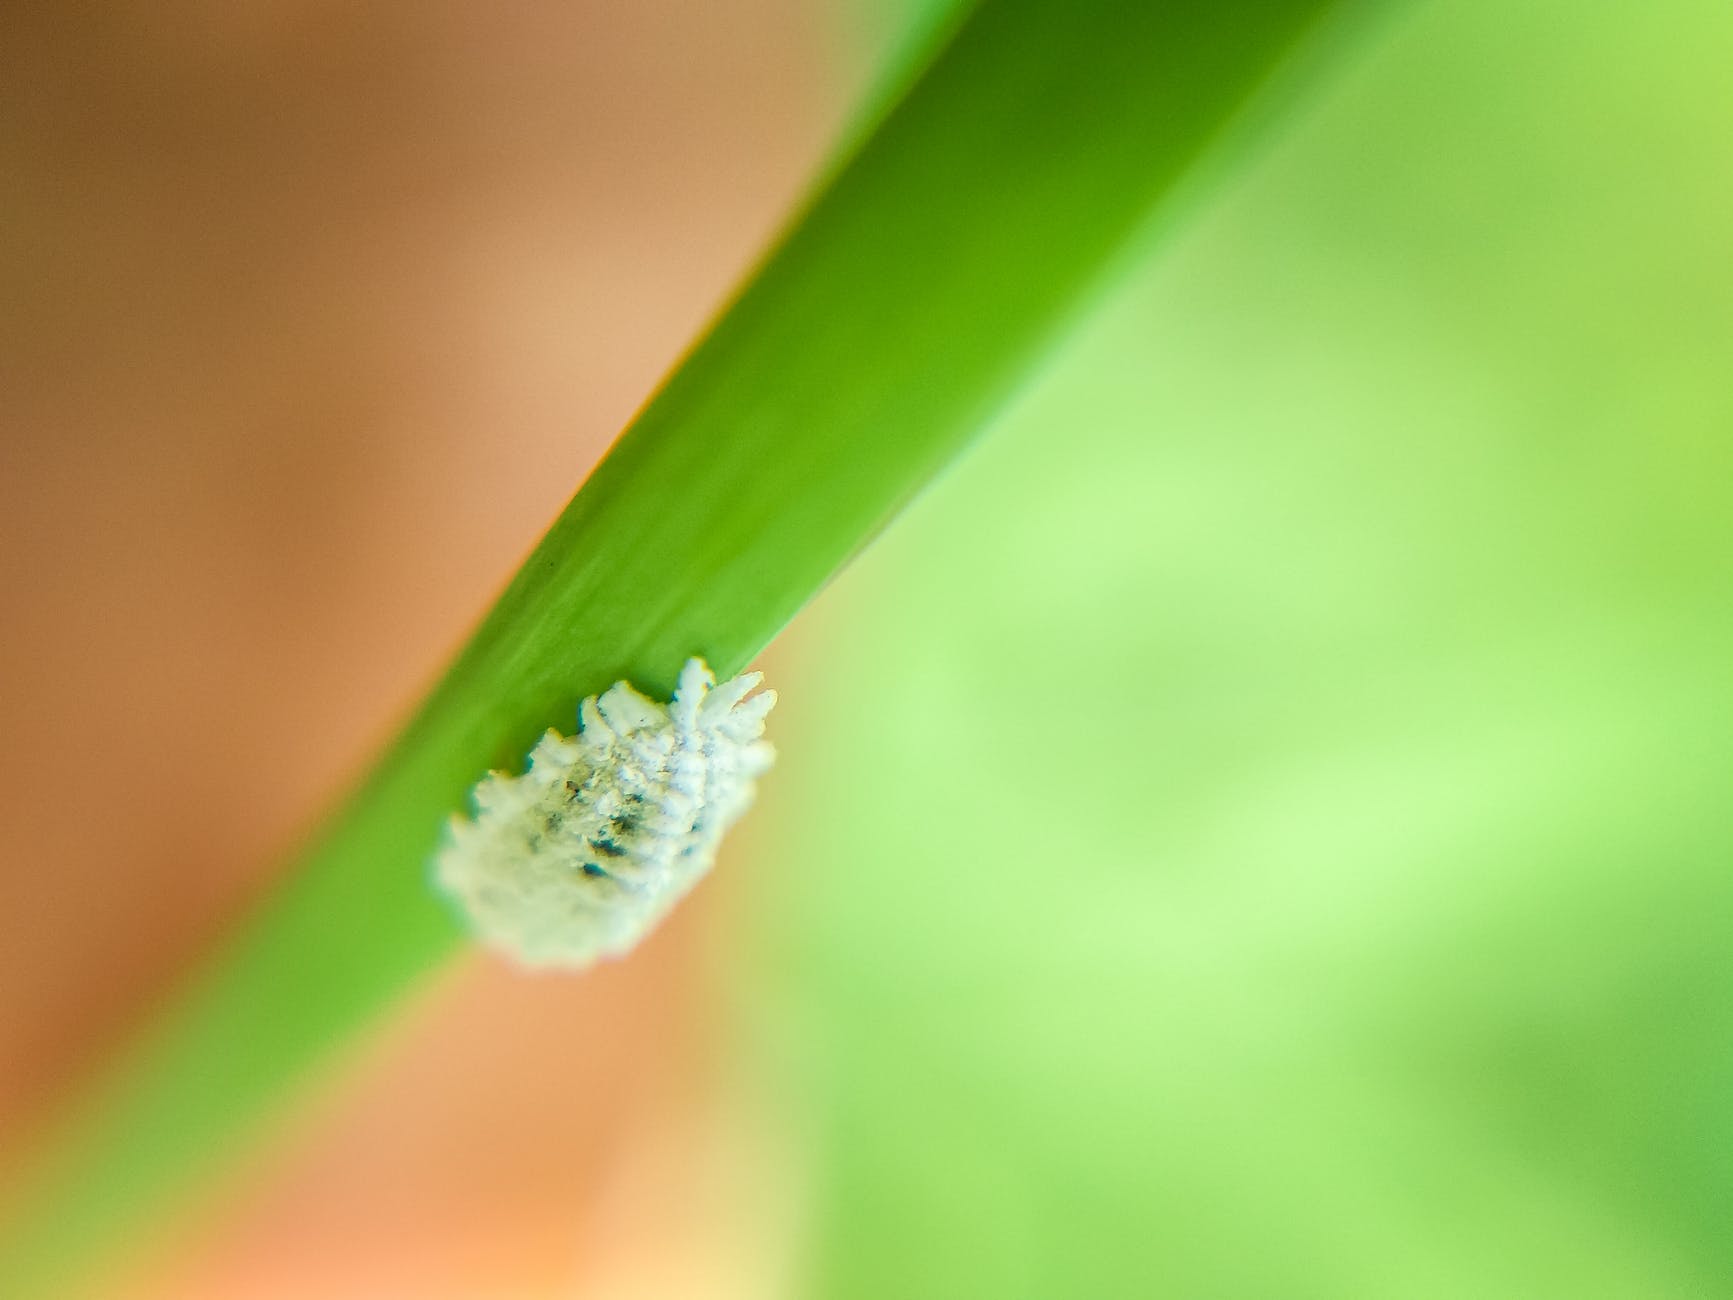 How To Get Rid Of Mealybugs Effectively